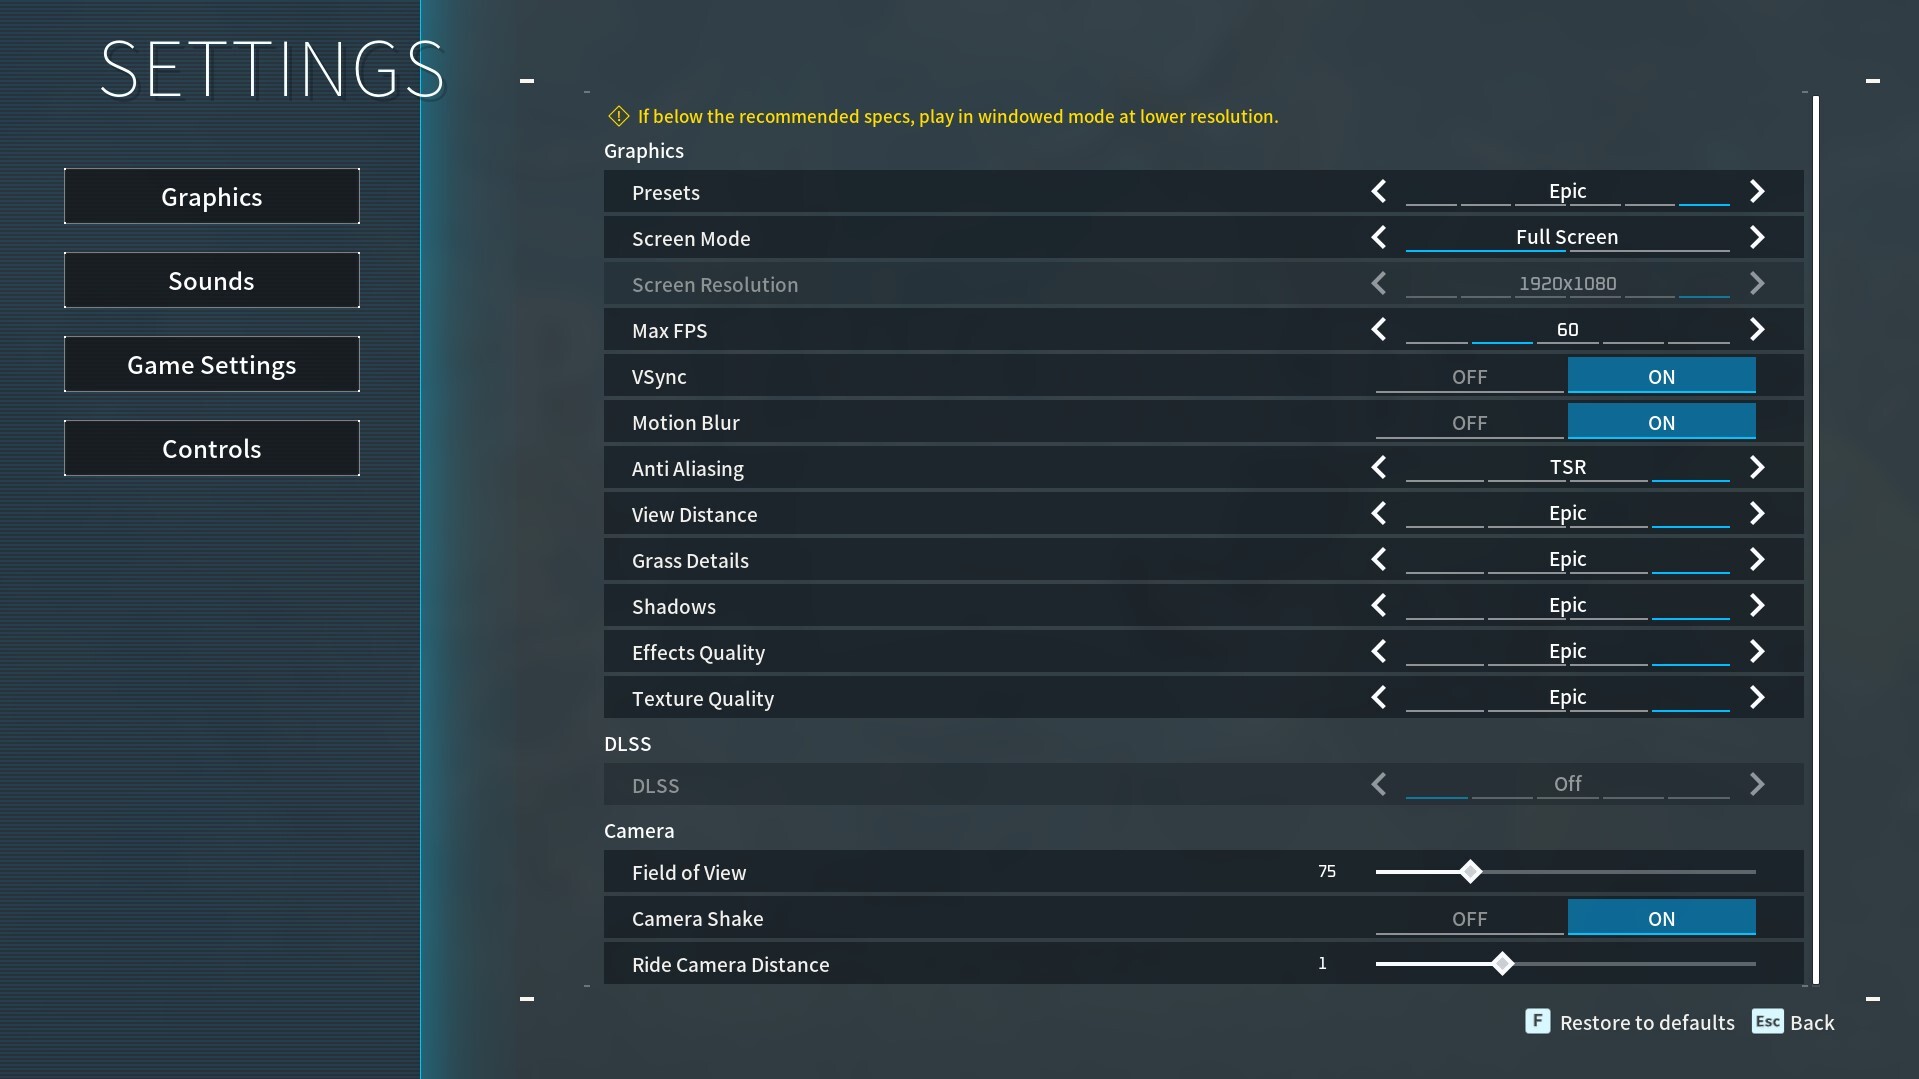 The DLSS option greyed out in Palworld's graphics options.